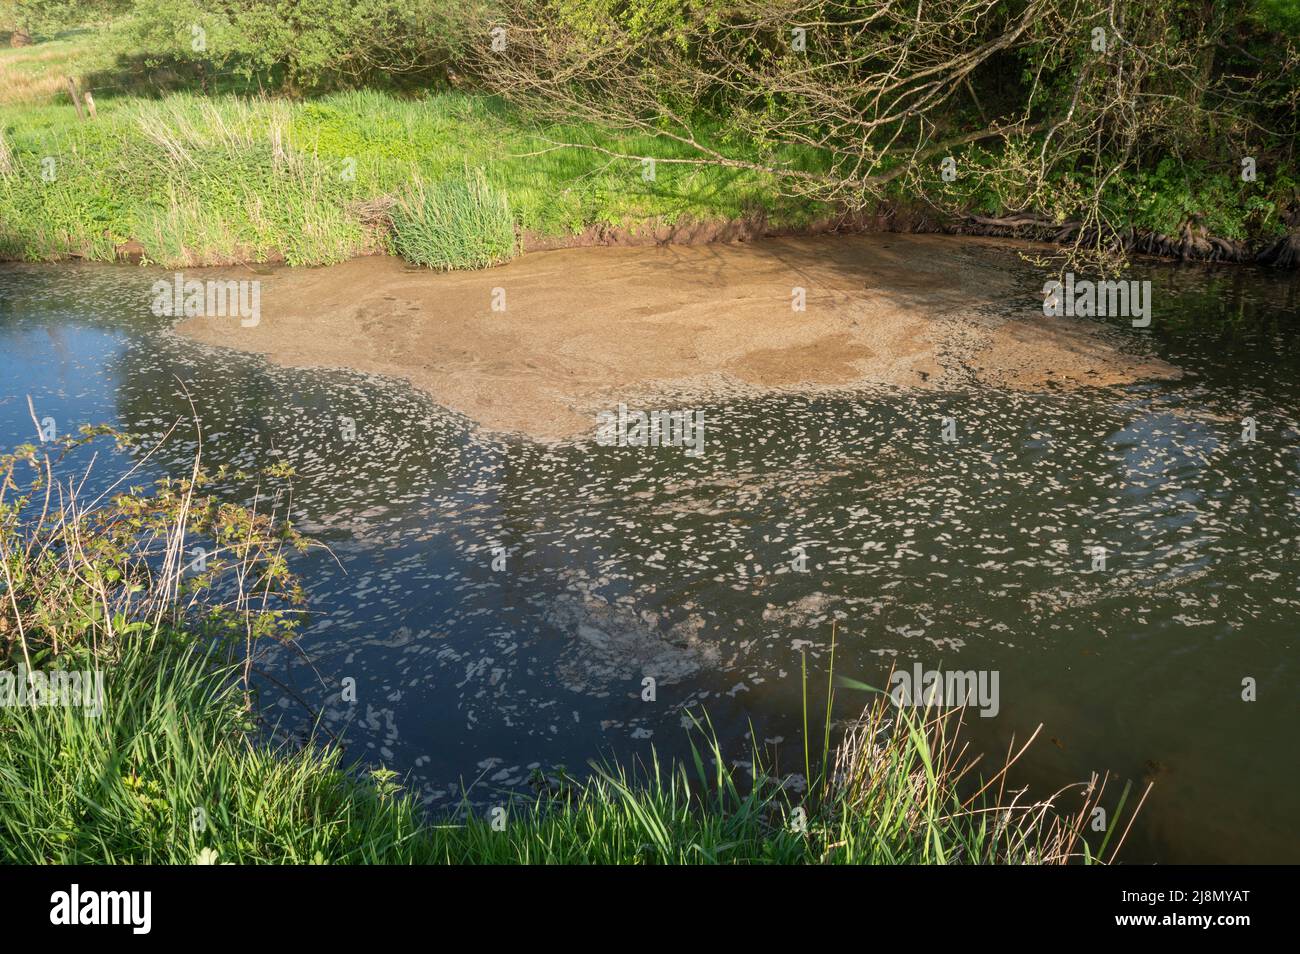 Scum or foam on surface of Gwendraeth Fach, Llangyndeyrn, Carmarthenshire,Wales, UK Stock Photo